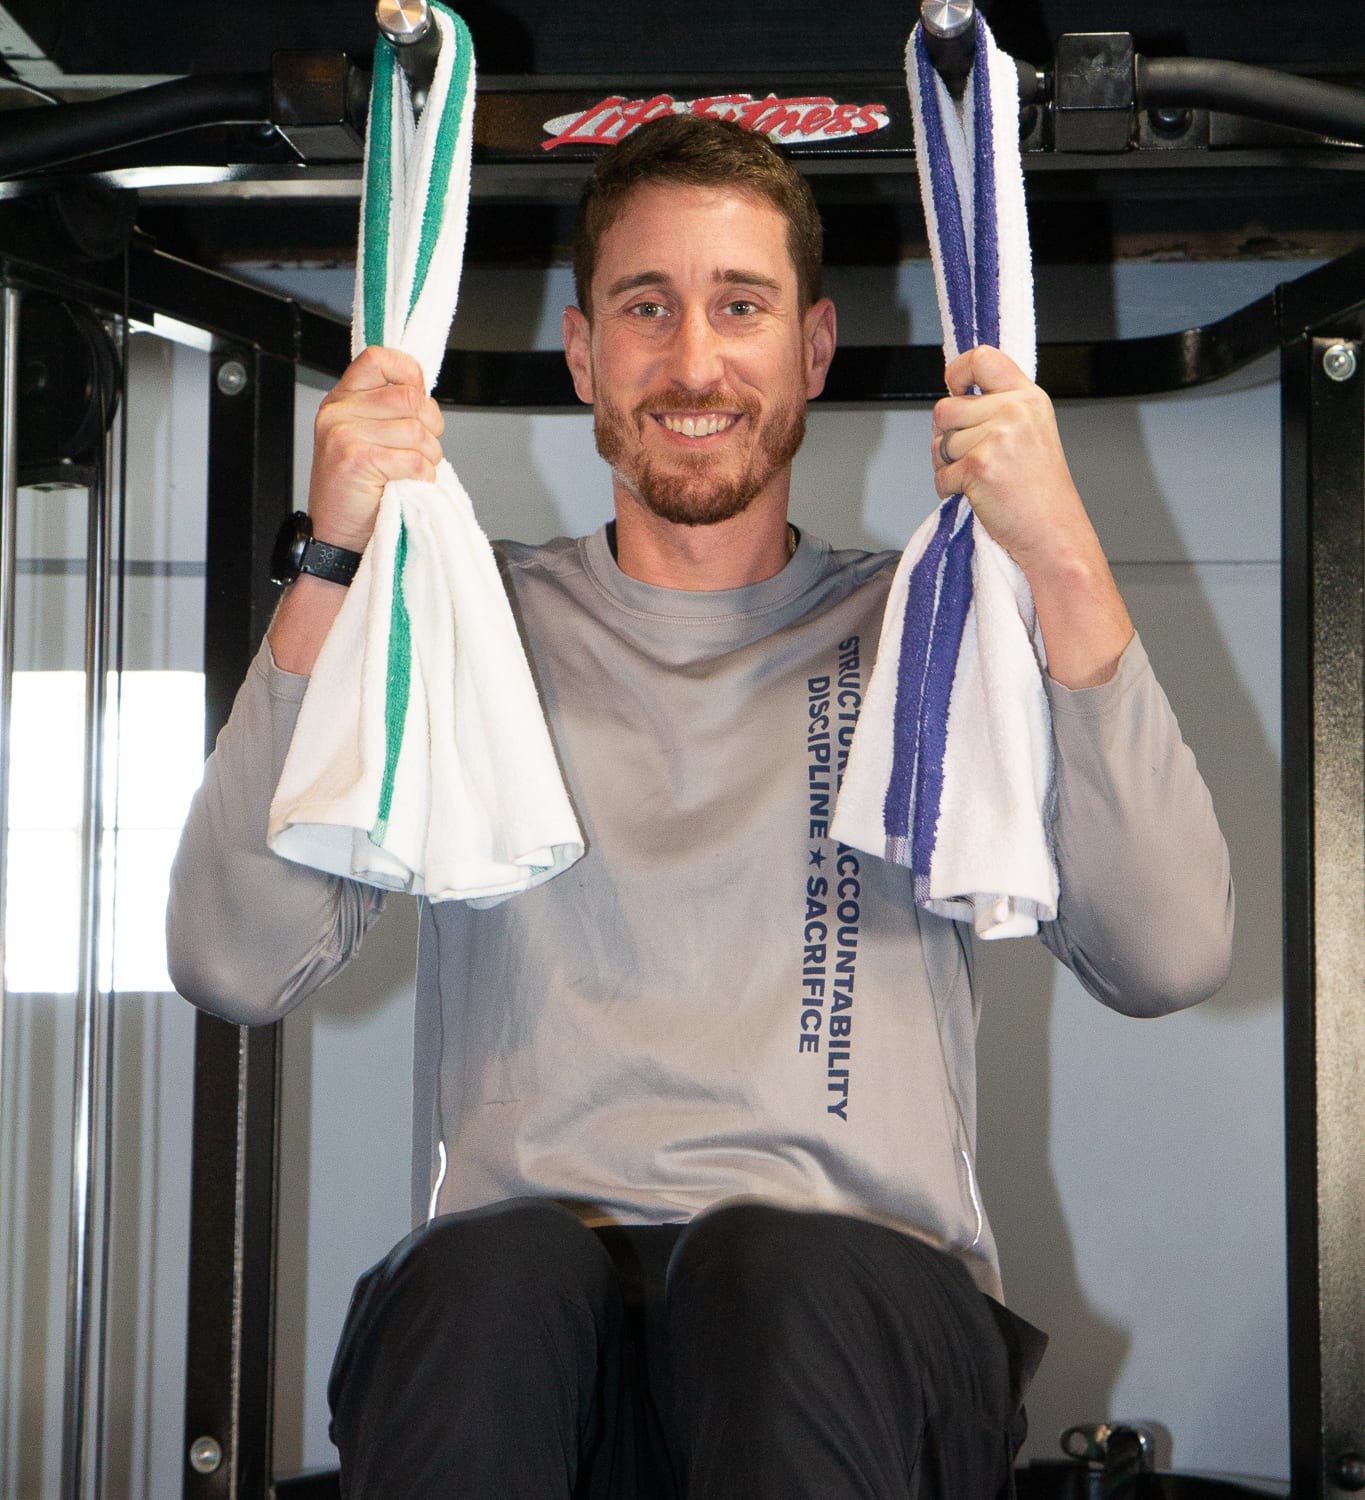 Man doing pull-ups with White Gym Towels with Green and Blue Stipe